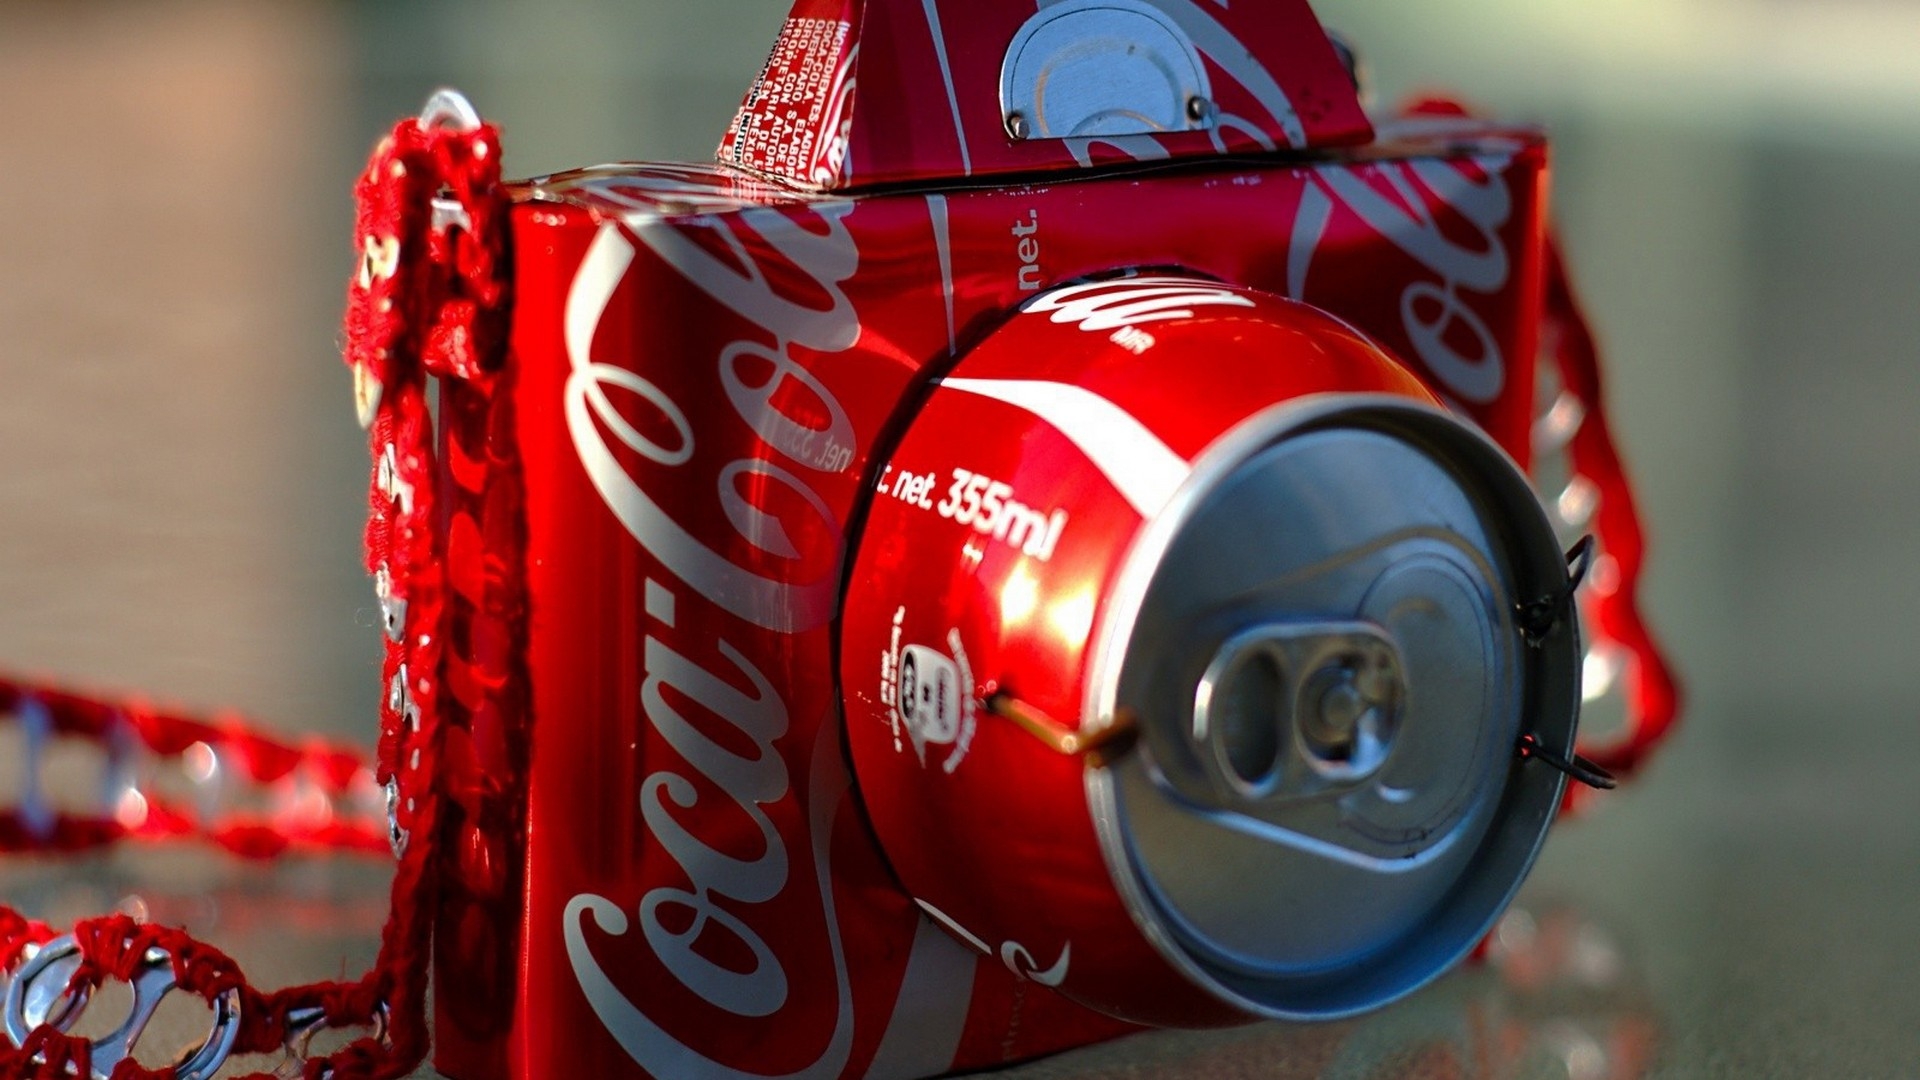 cola wallpaper,coca cola,red,beverage can,cola,carbonated soft drinks